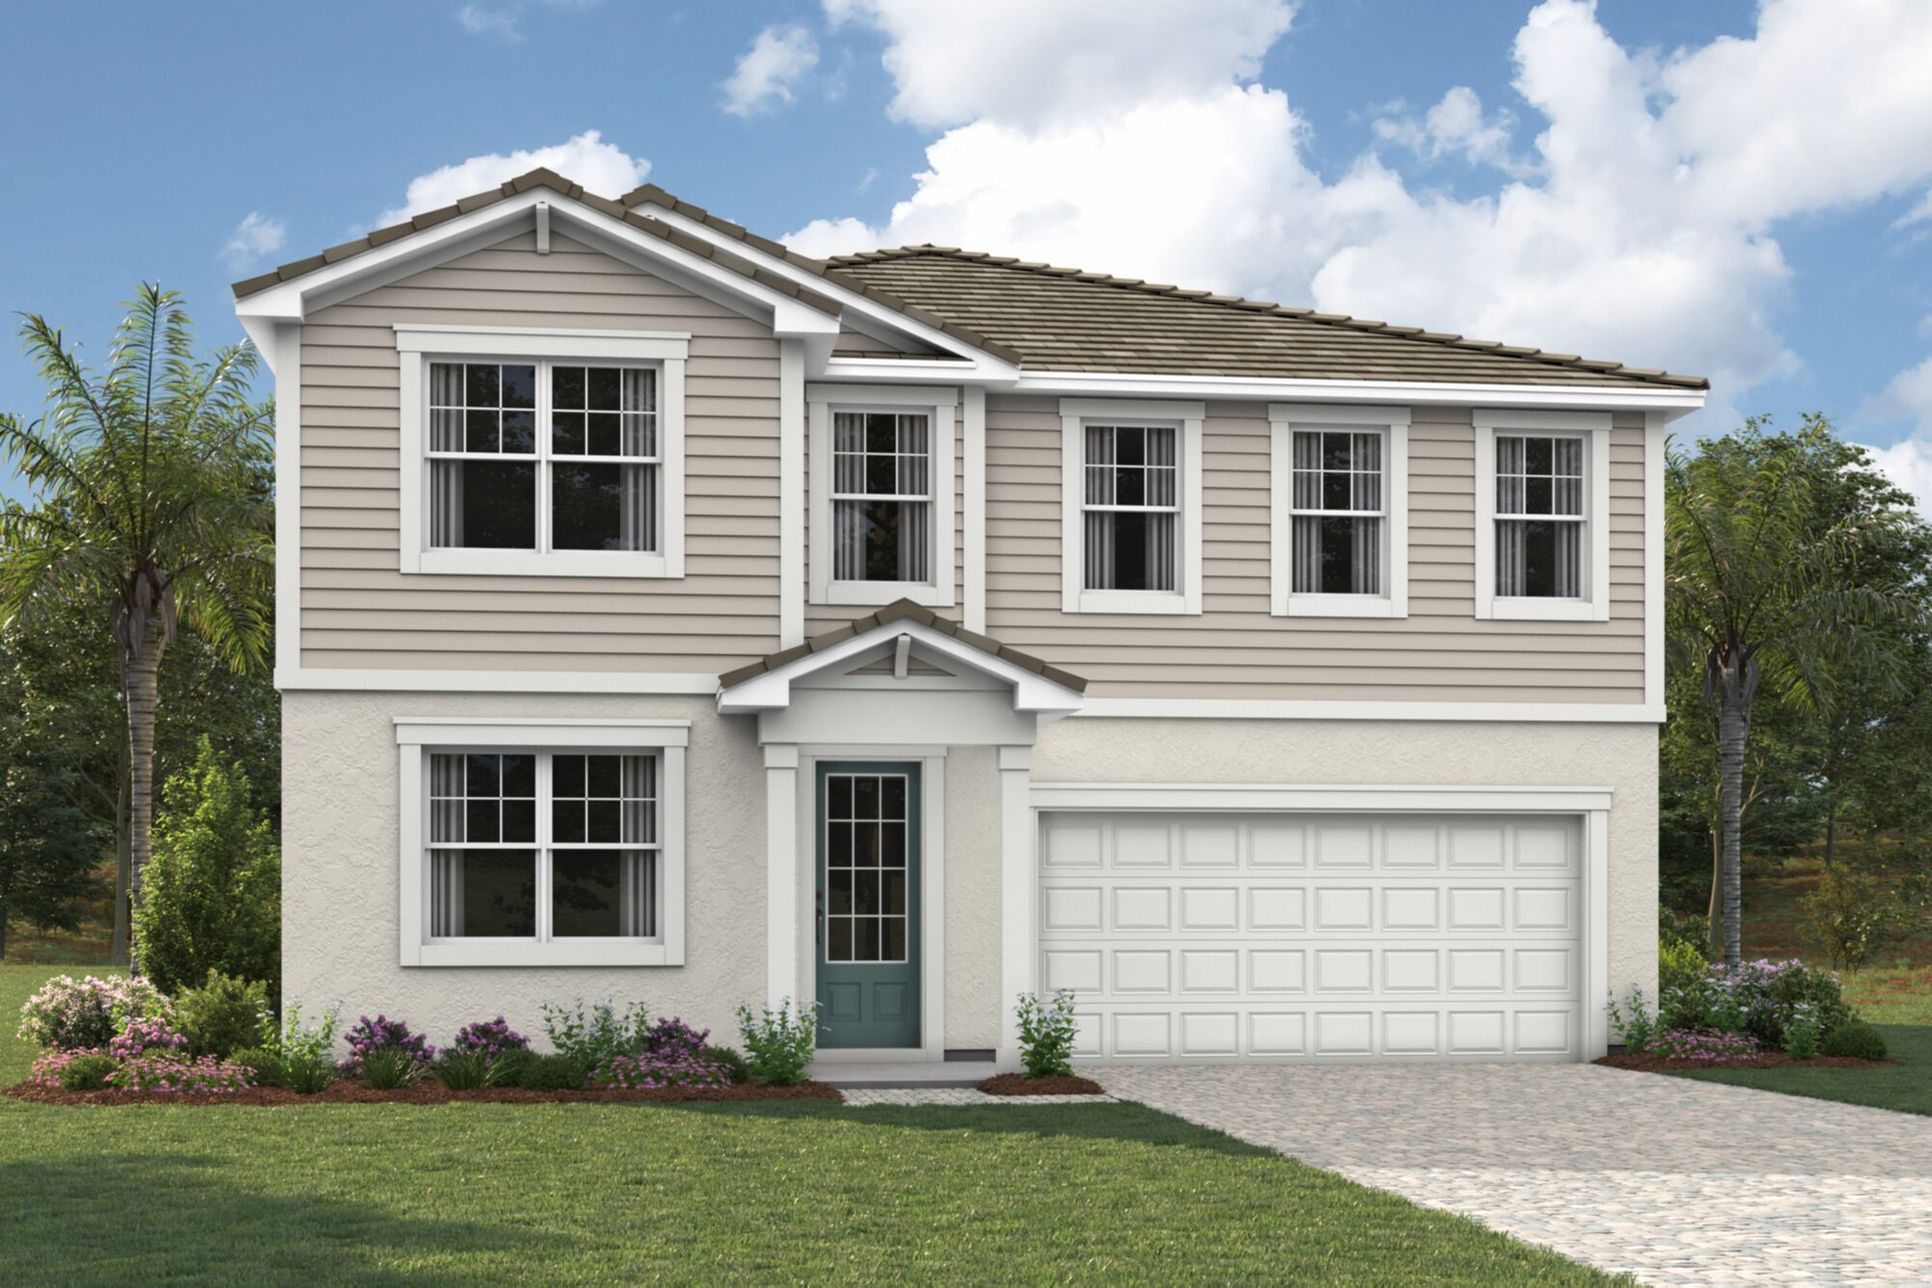 Exterior:Low Country exterior style